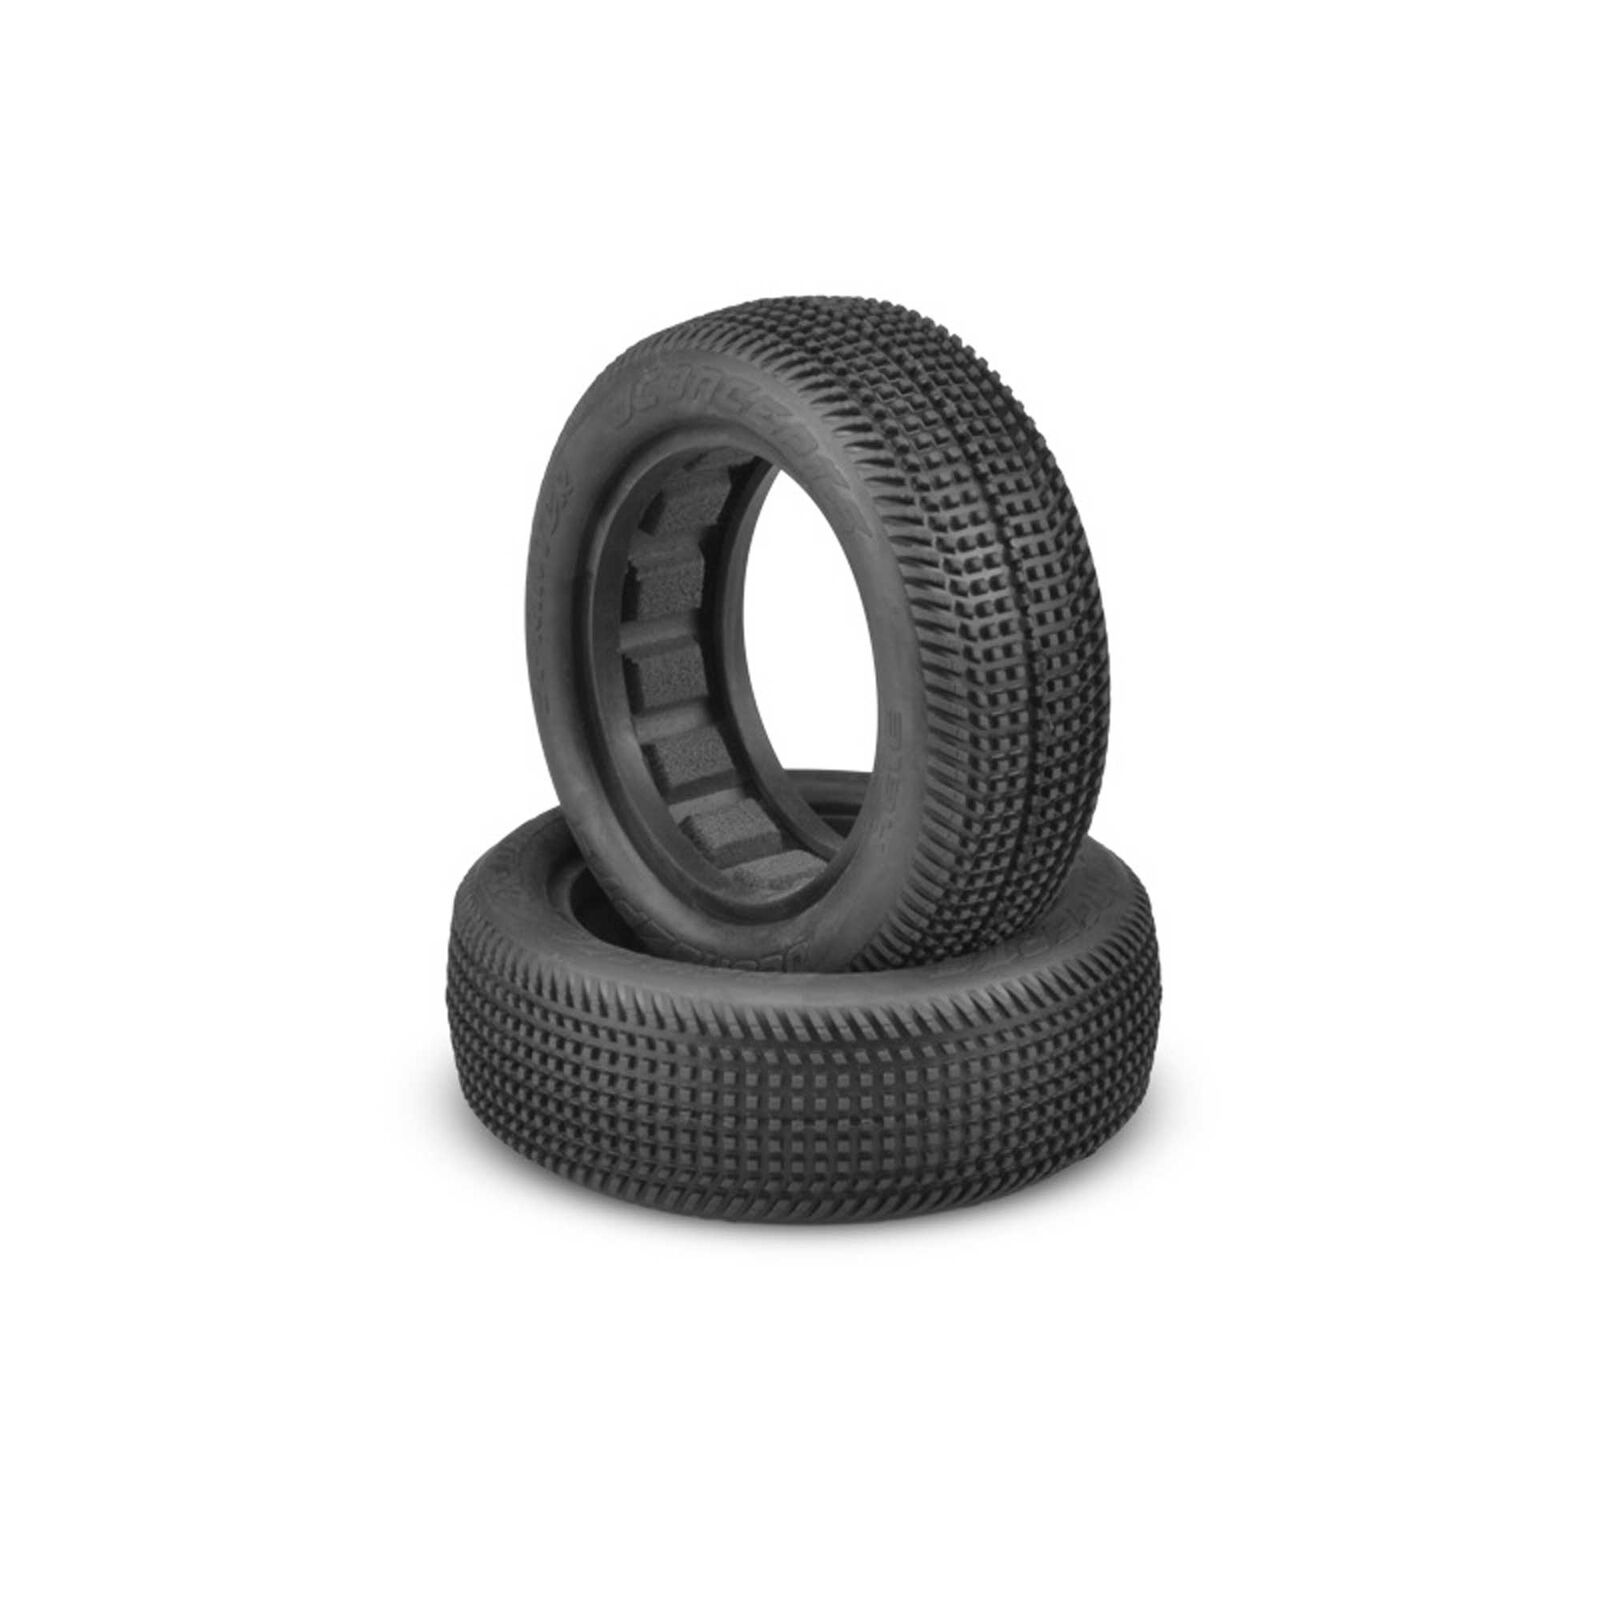 1/10 Sprinter 2.2” Front Buggy Tires and Inserts, Green Compound (2)